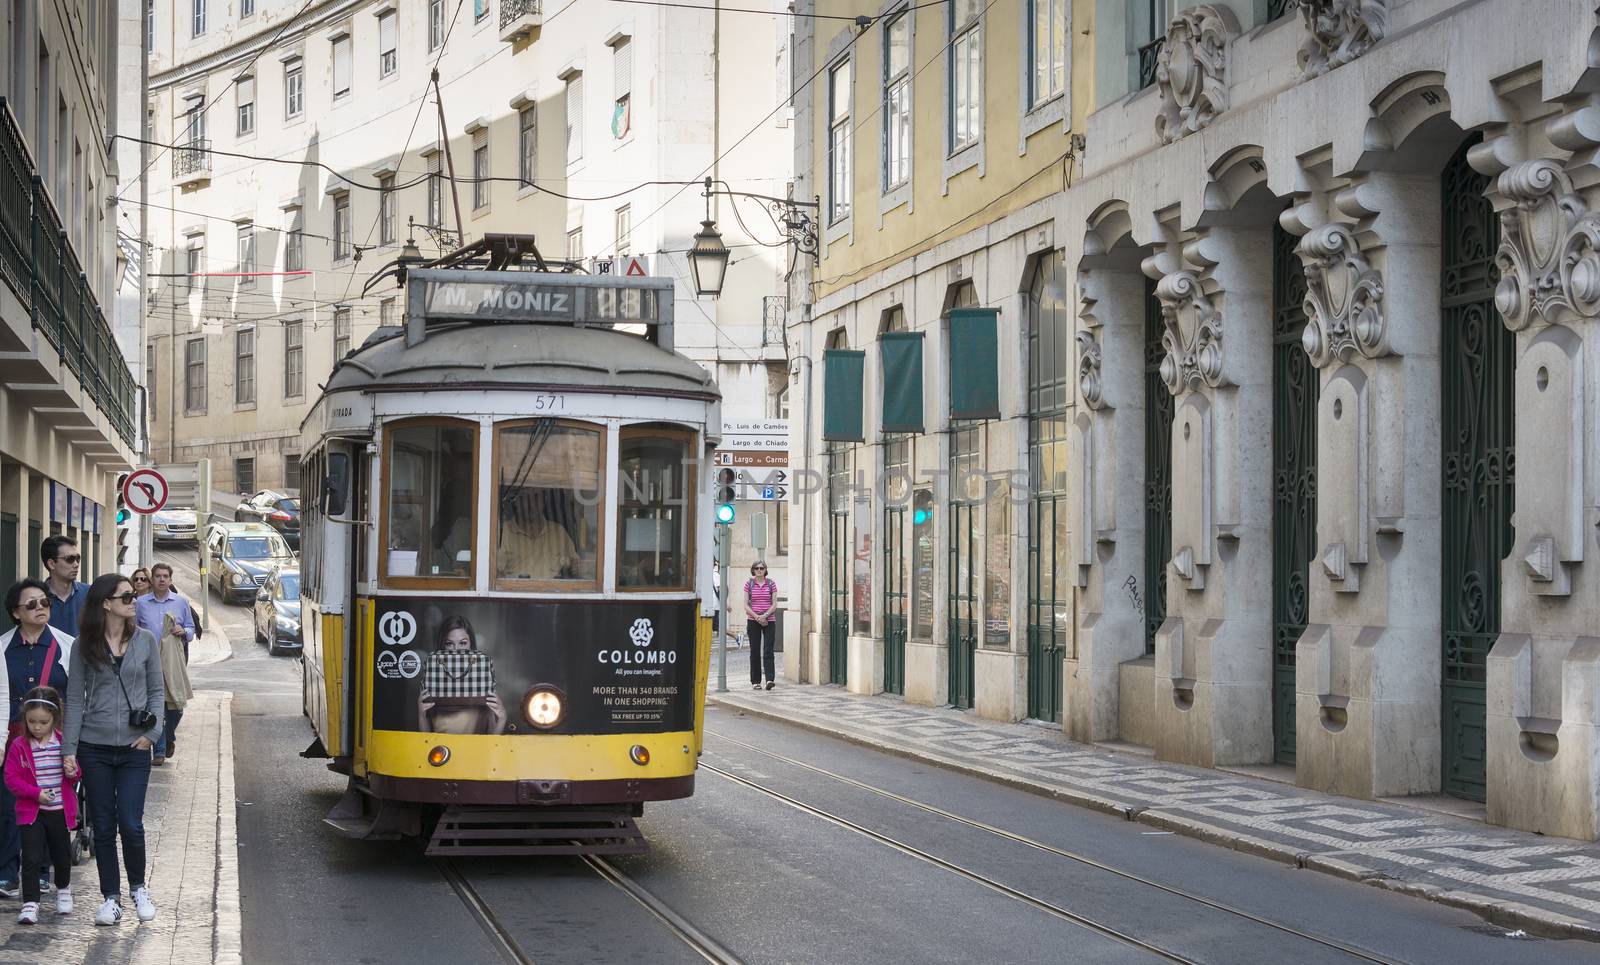 LISBON, PORTUGAL - SEPTEMBER 26: Unidentified people sitting in the Yellow tram  goes by the street of Lisbon city center on September 26, 2015. Lisbon is a capital and must famous city of Portugal